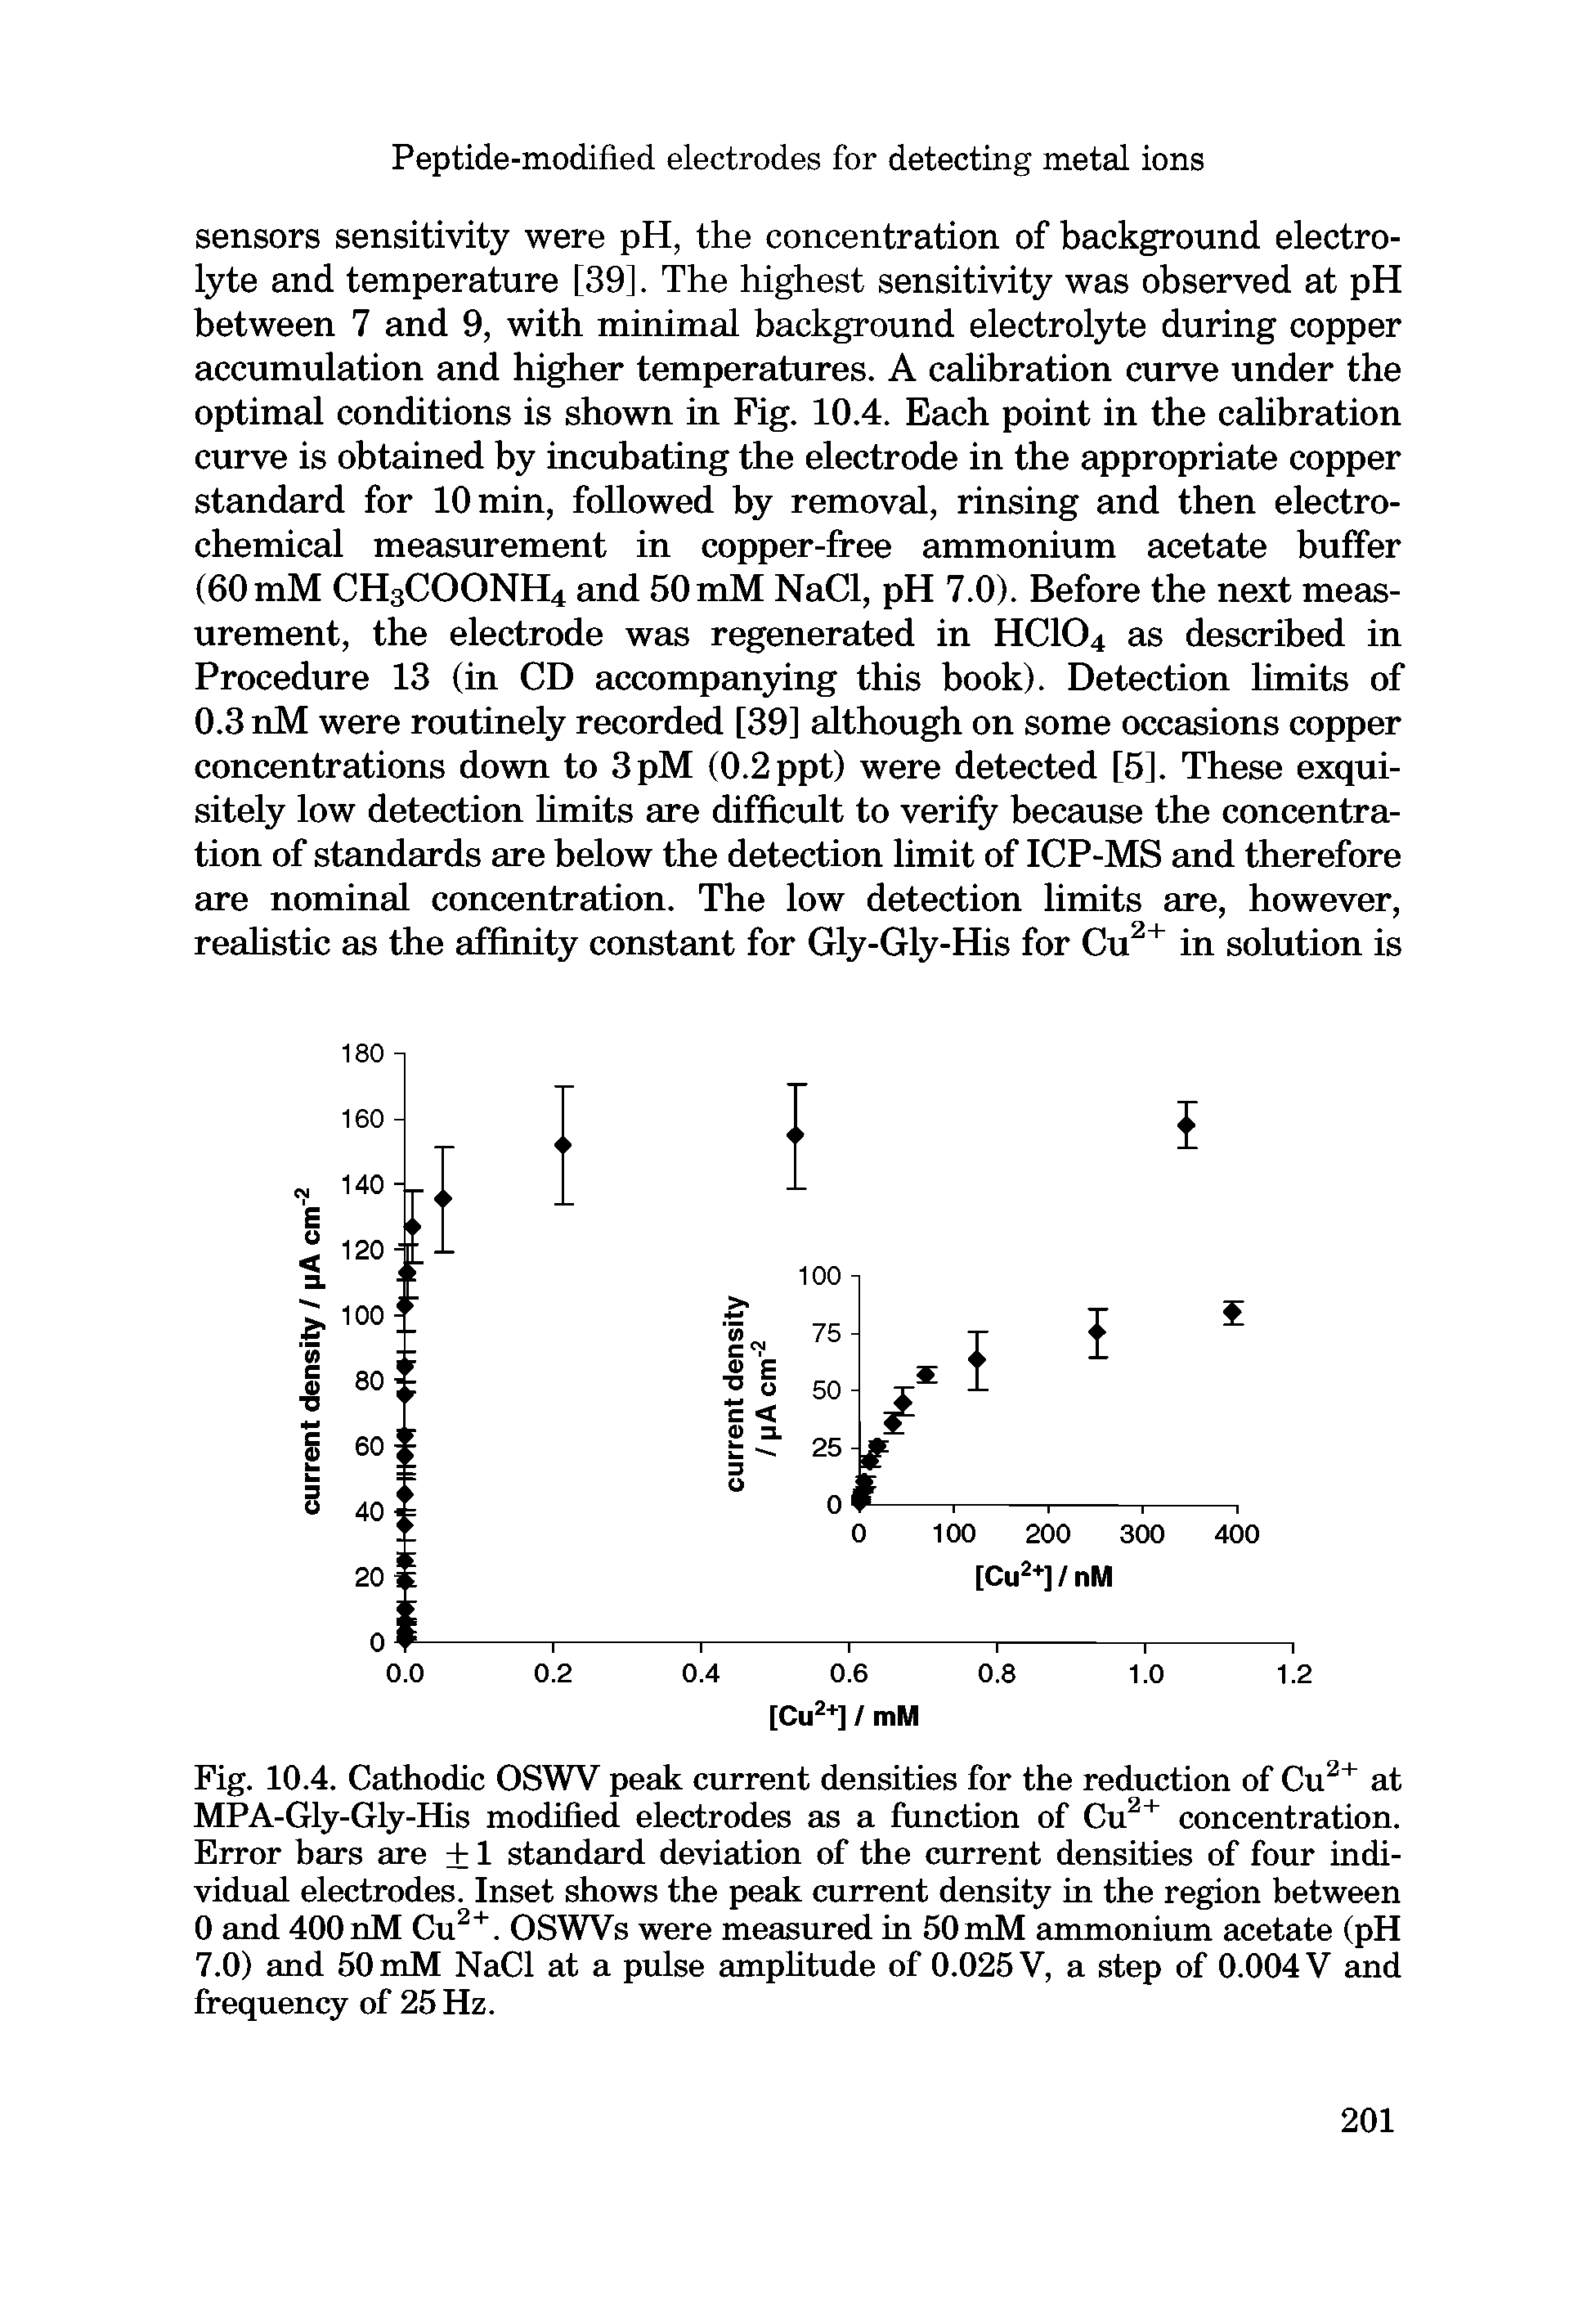 Fig. 10.4. Cathodic OSWV peak current densities for the reduction of Cu2+ at MPA-Gly-Gly-His modified electrodes as a function of Cu2+ concentration. Error bars are +1 standard deviation of the current densities of four individual electrodes. Inset shows the peak current density in the region between 0 and 400 nM Cu2+. OSWVs were measured in 50 mM ammonium acetate (pH 7.0) and 50 mM NaCl at a pulse amplitude of 0.025 V, a step of 0.004 V and frequency of 25 Hz.